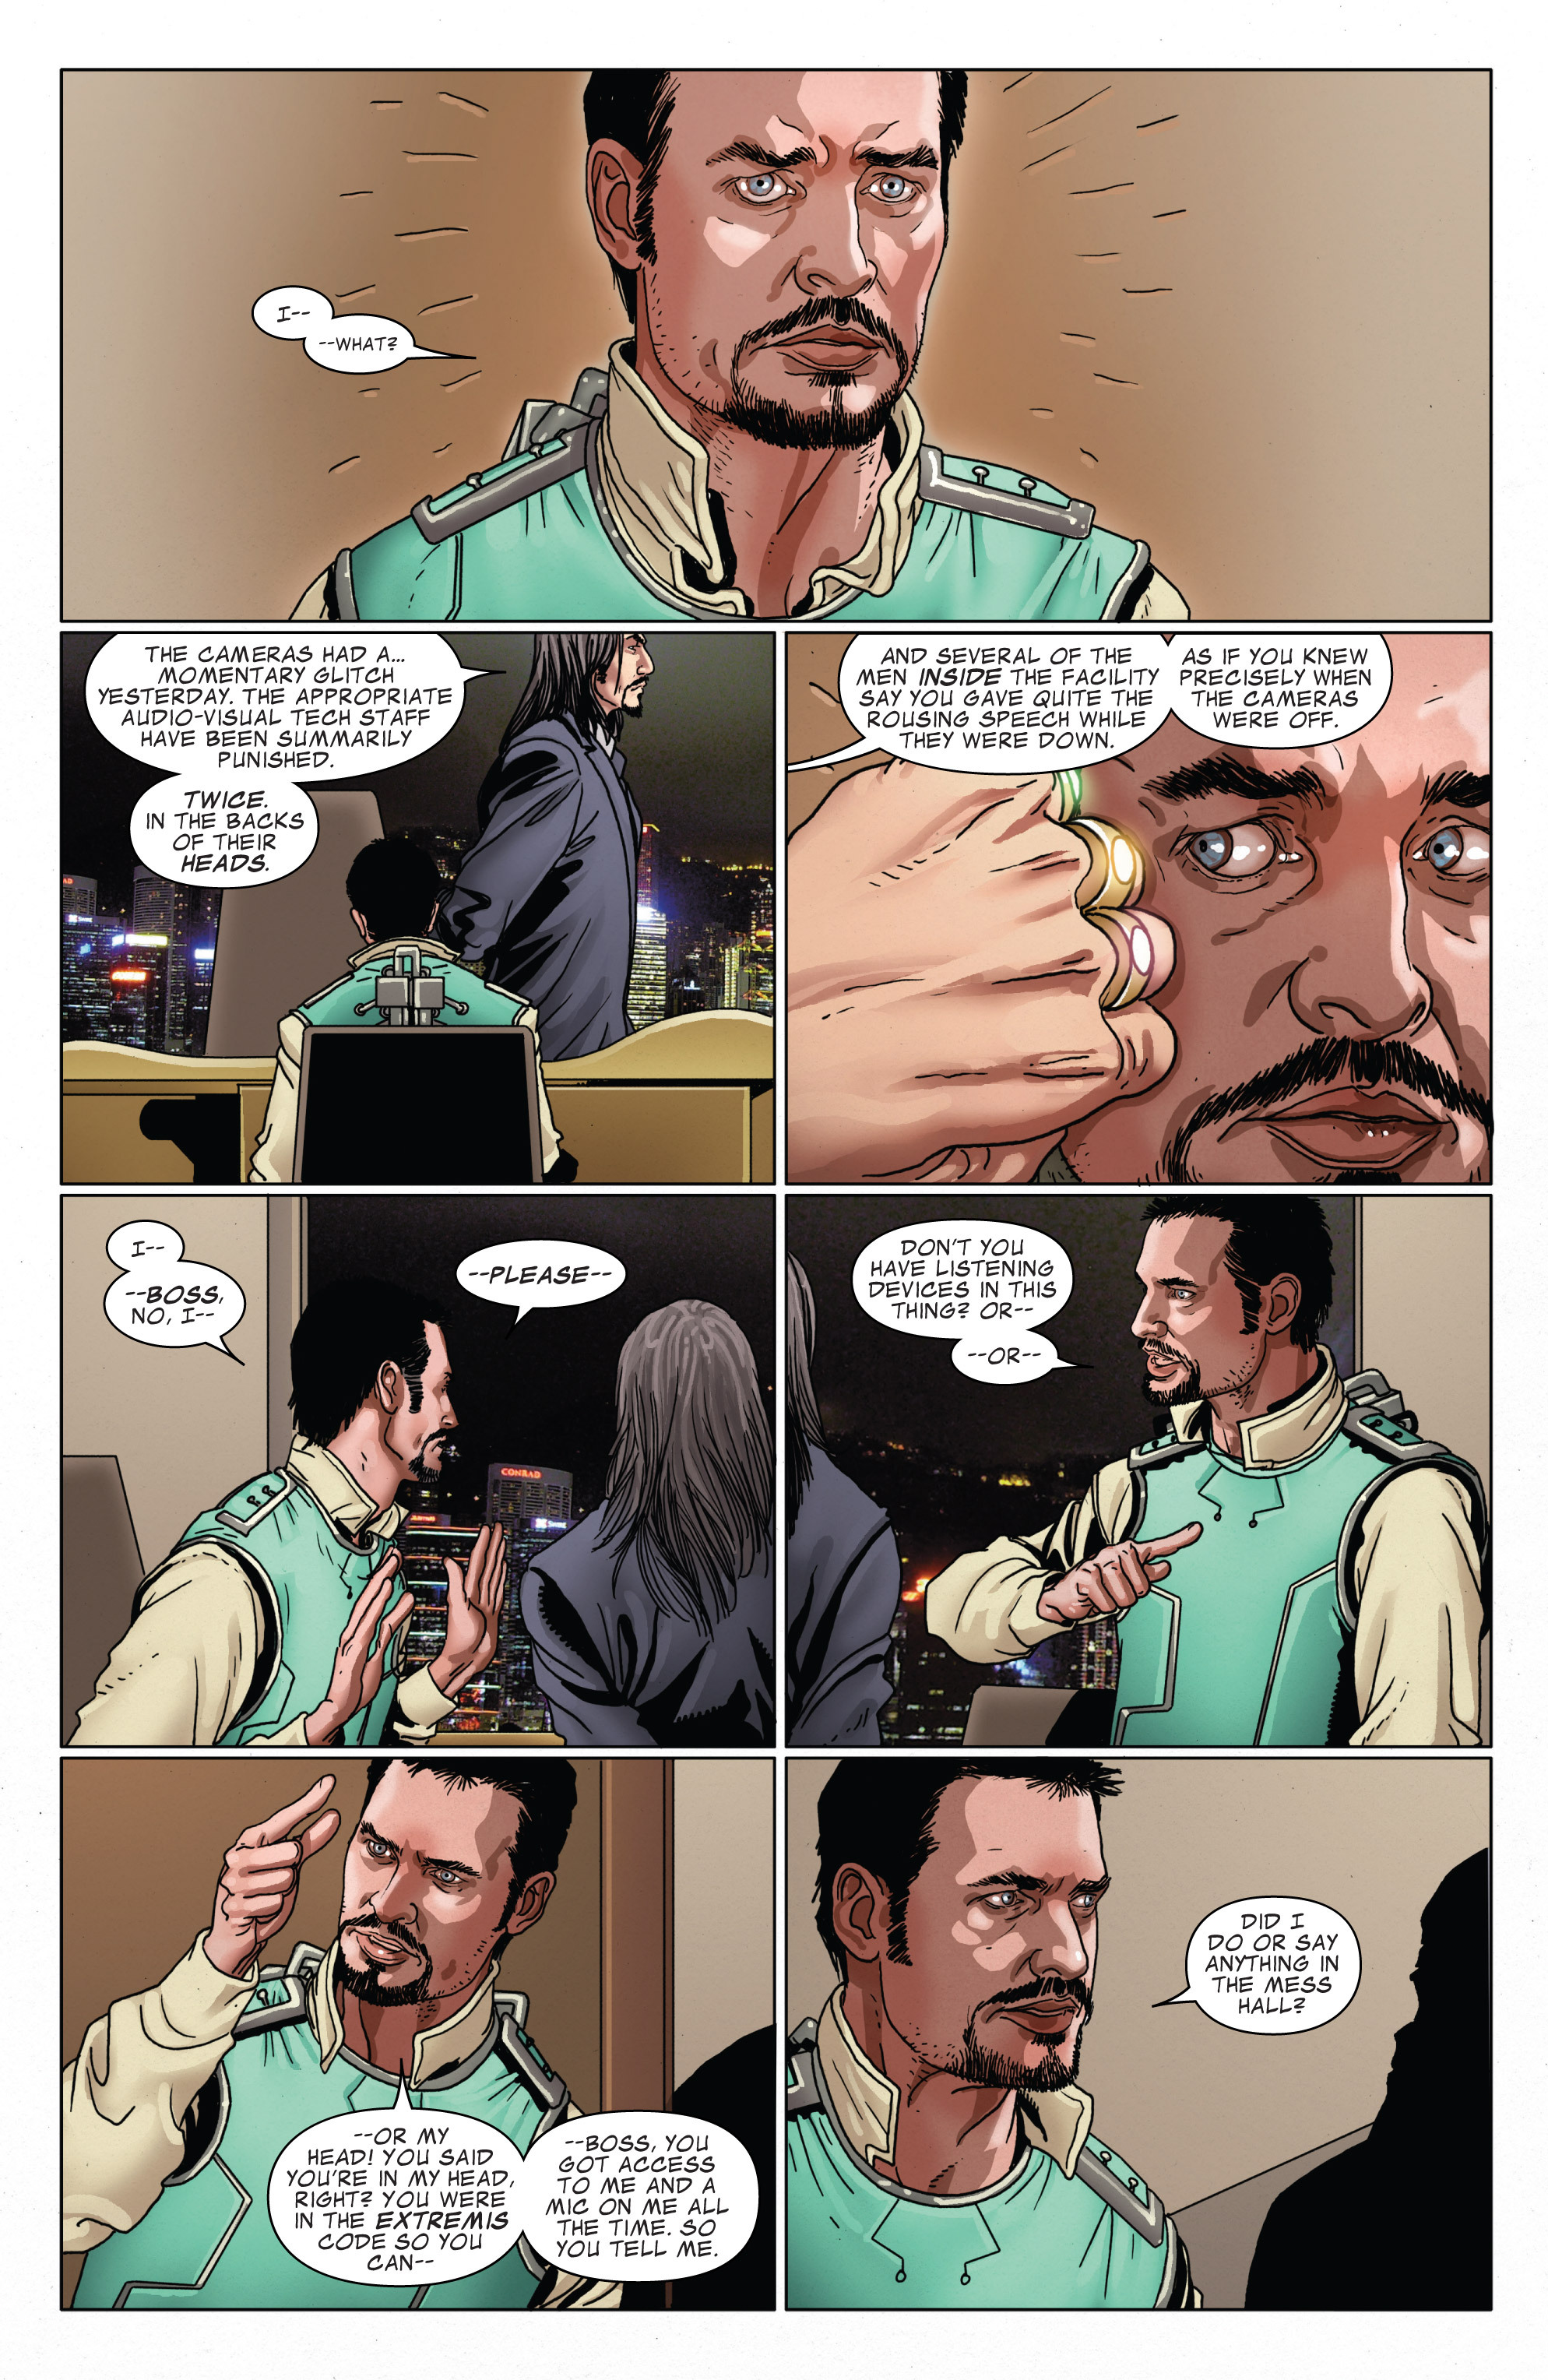 Invincible Iron Man (2008) 524 Page 9